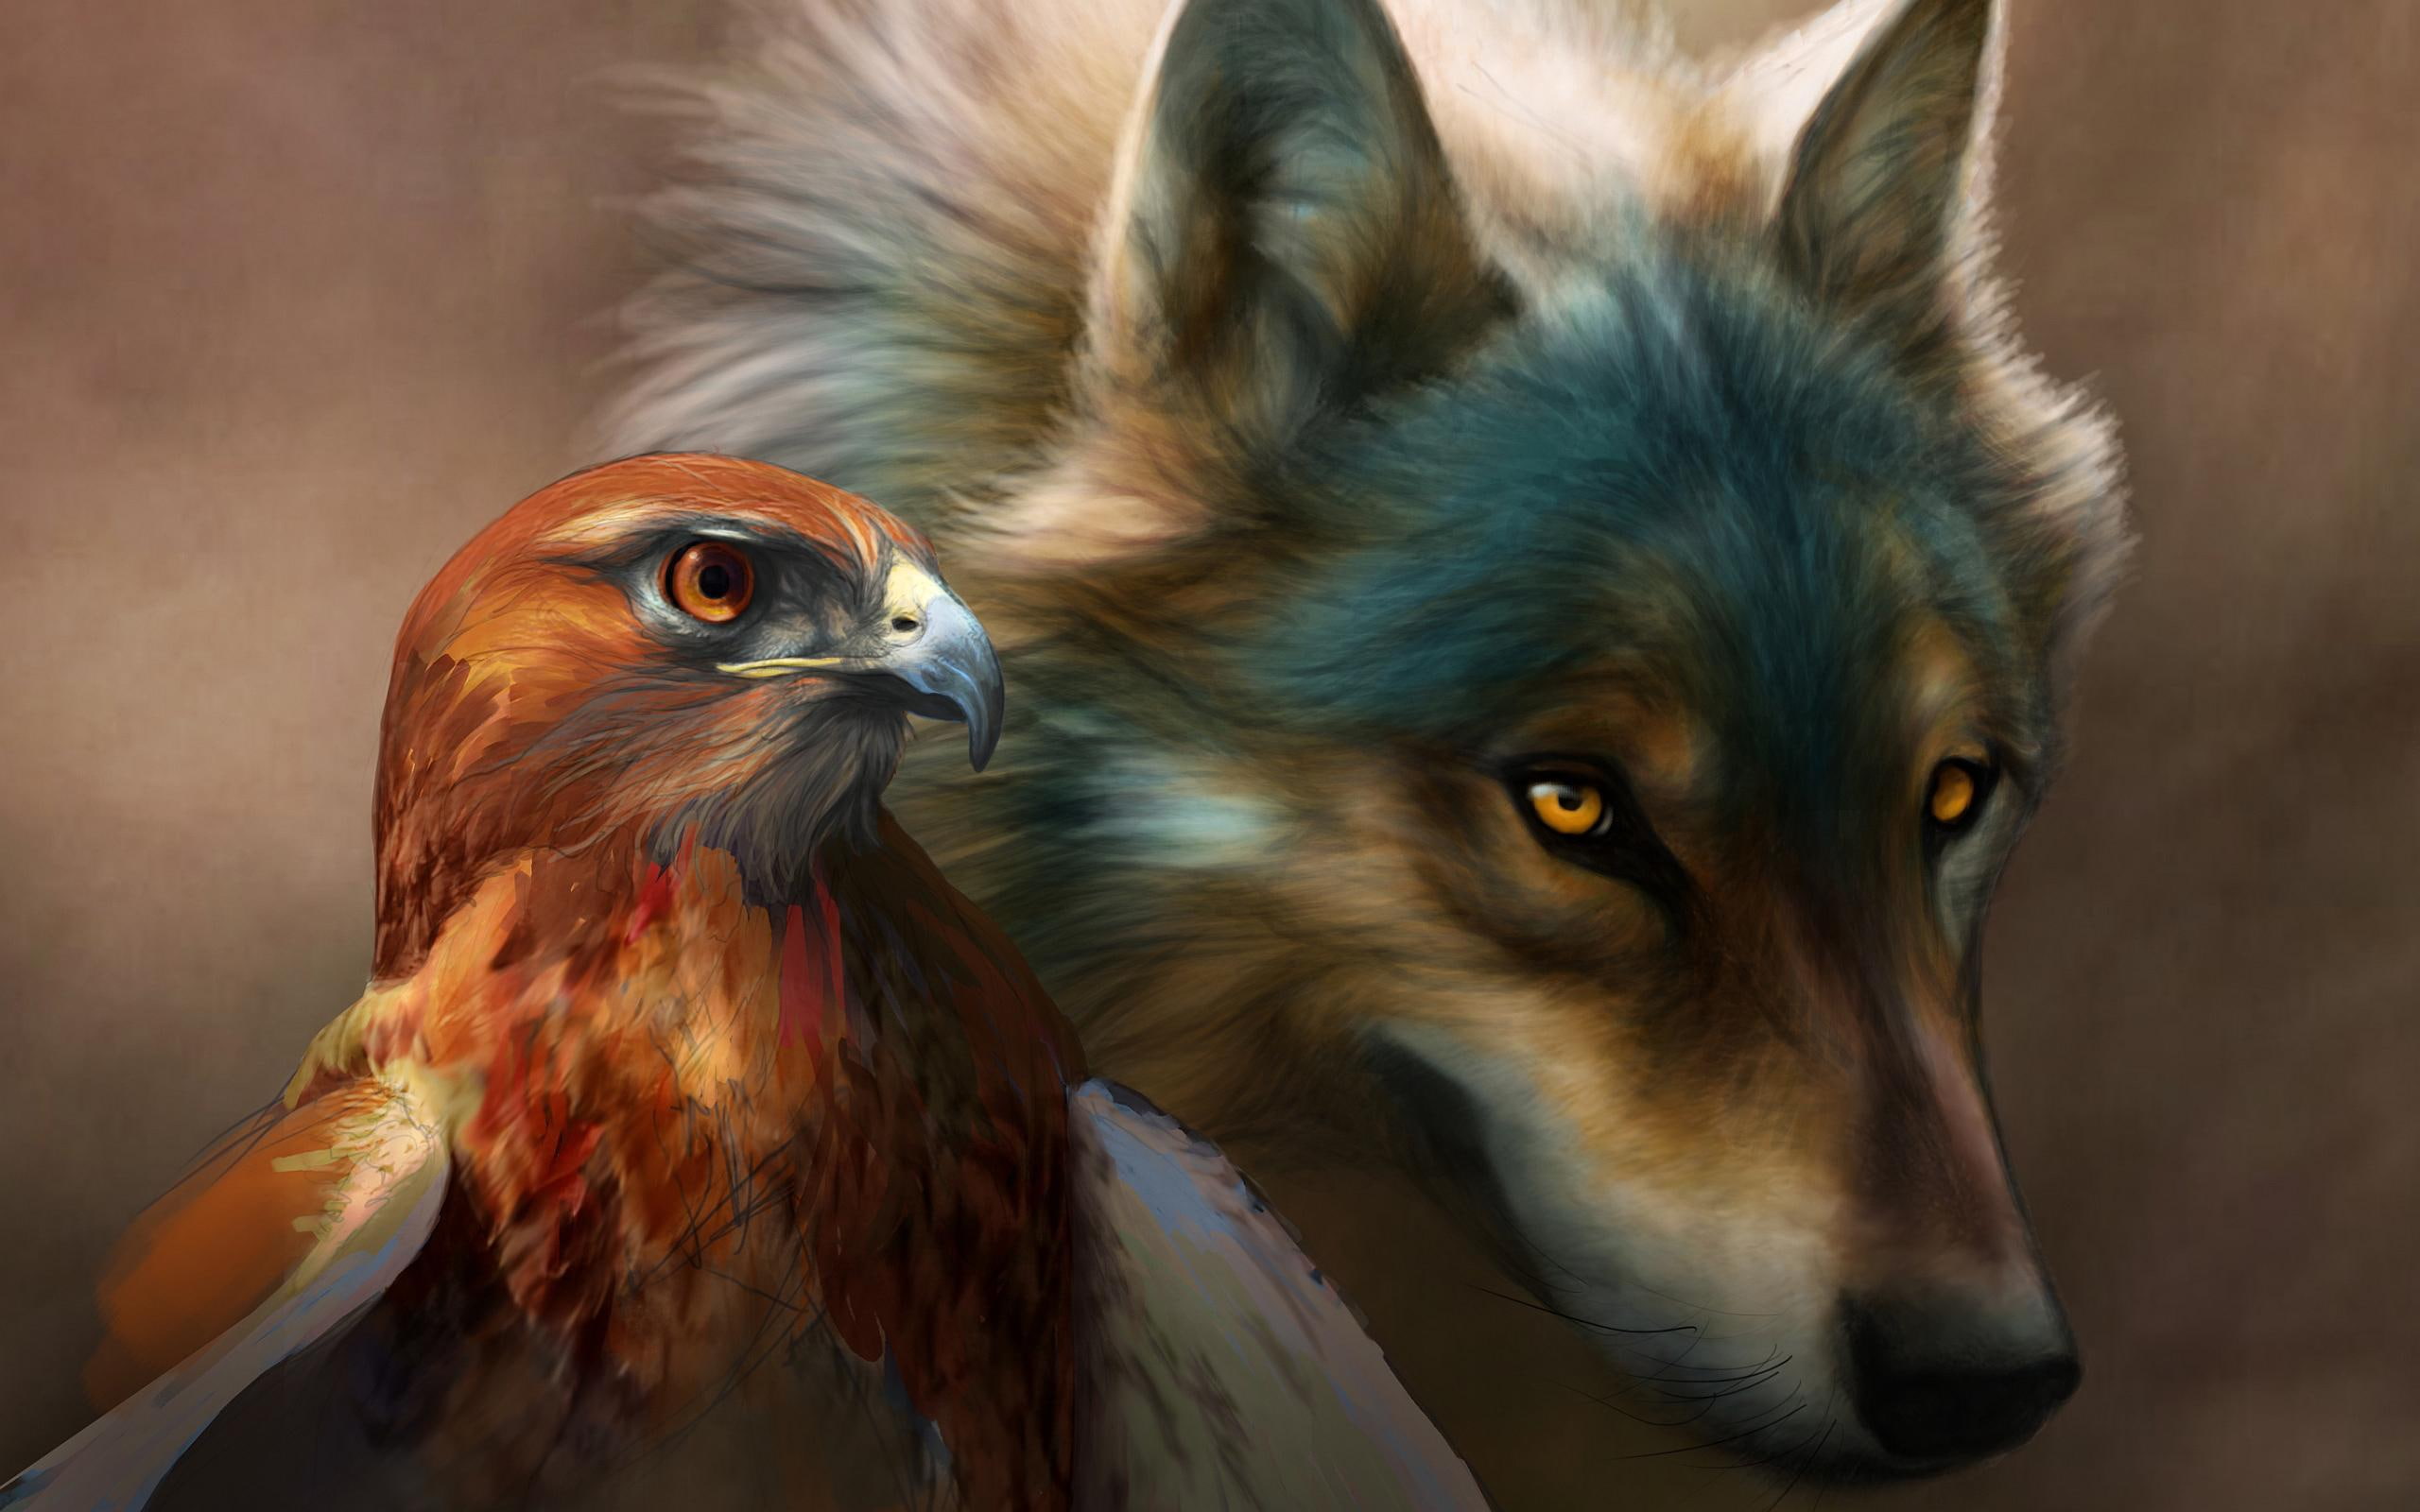 EAGLE AND THE WOLF, golden eagle and brown wolf, painting